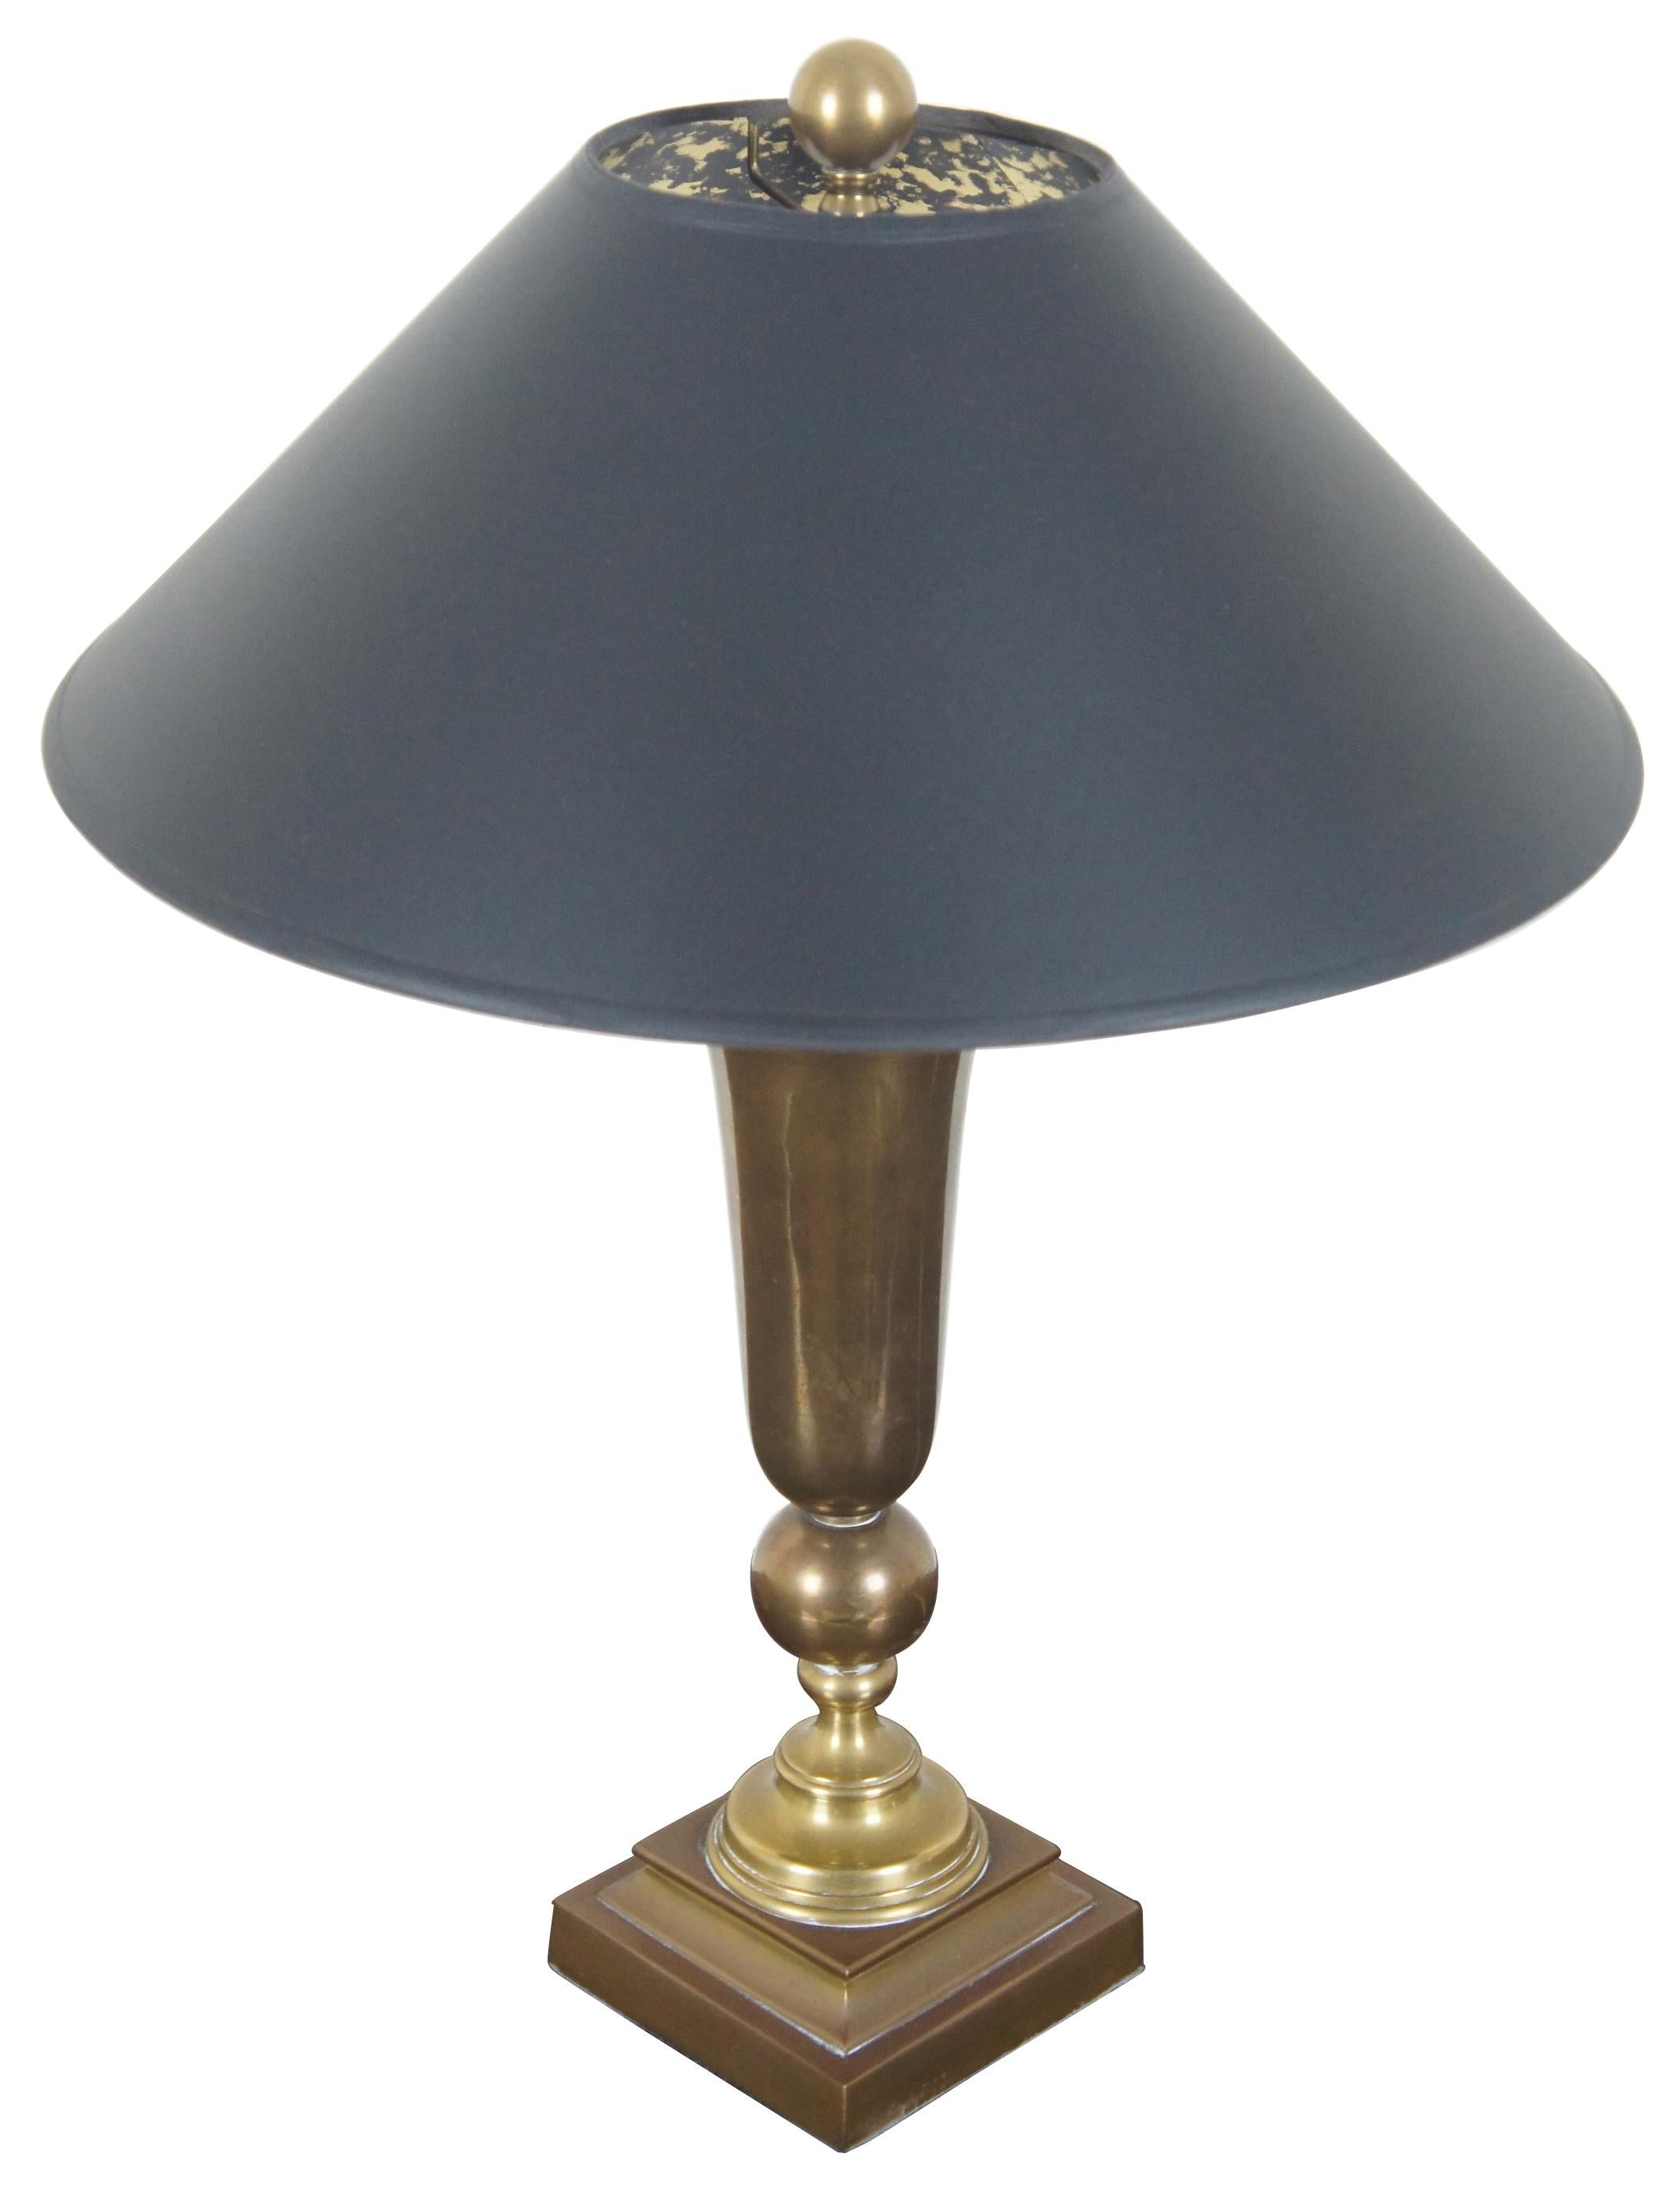 Vintage 1991 Chapman graceful urn form lamp 15100A. Features an urn / trumpet or trophy shape with black shade and gold foil interior.

Measures: Shade 16” x 6” (Diameter x Height), 23”.